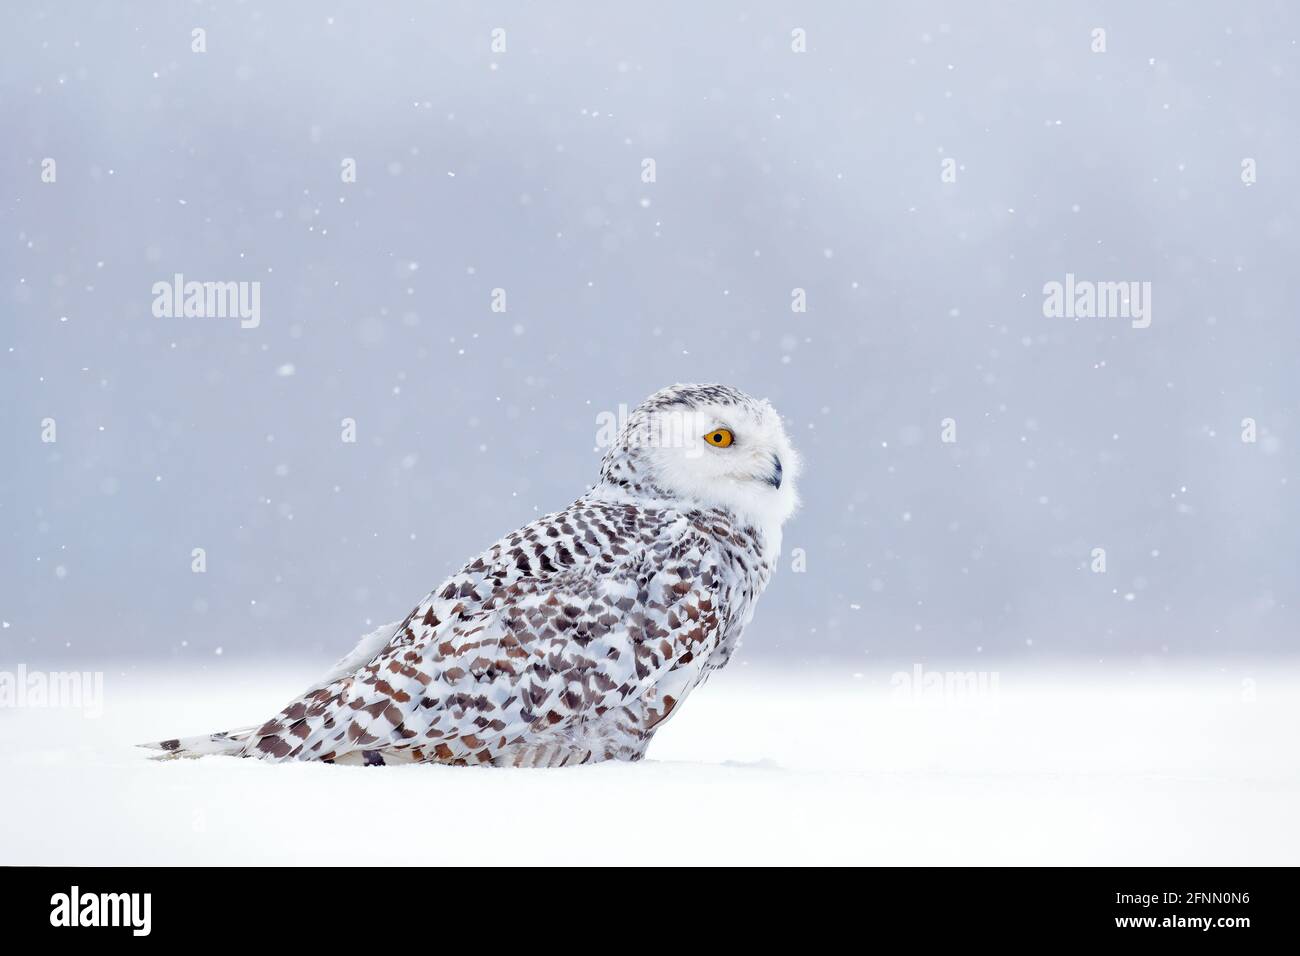 Snowy owl sitting on the snow in the habitat. Cold winter with white bird. Wildlife scene from nature, Manitoba, Canada. Owl on the white meadow, anim Stock Photo